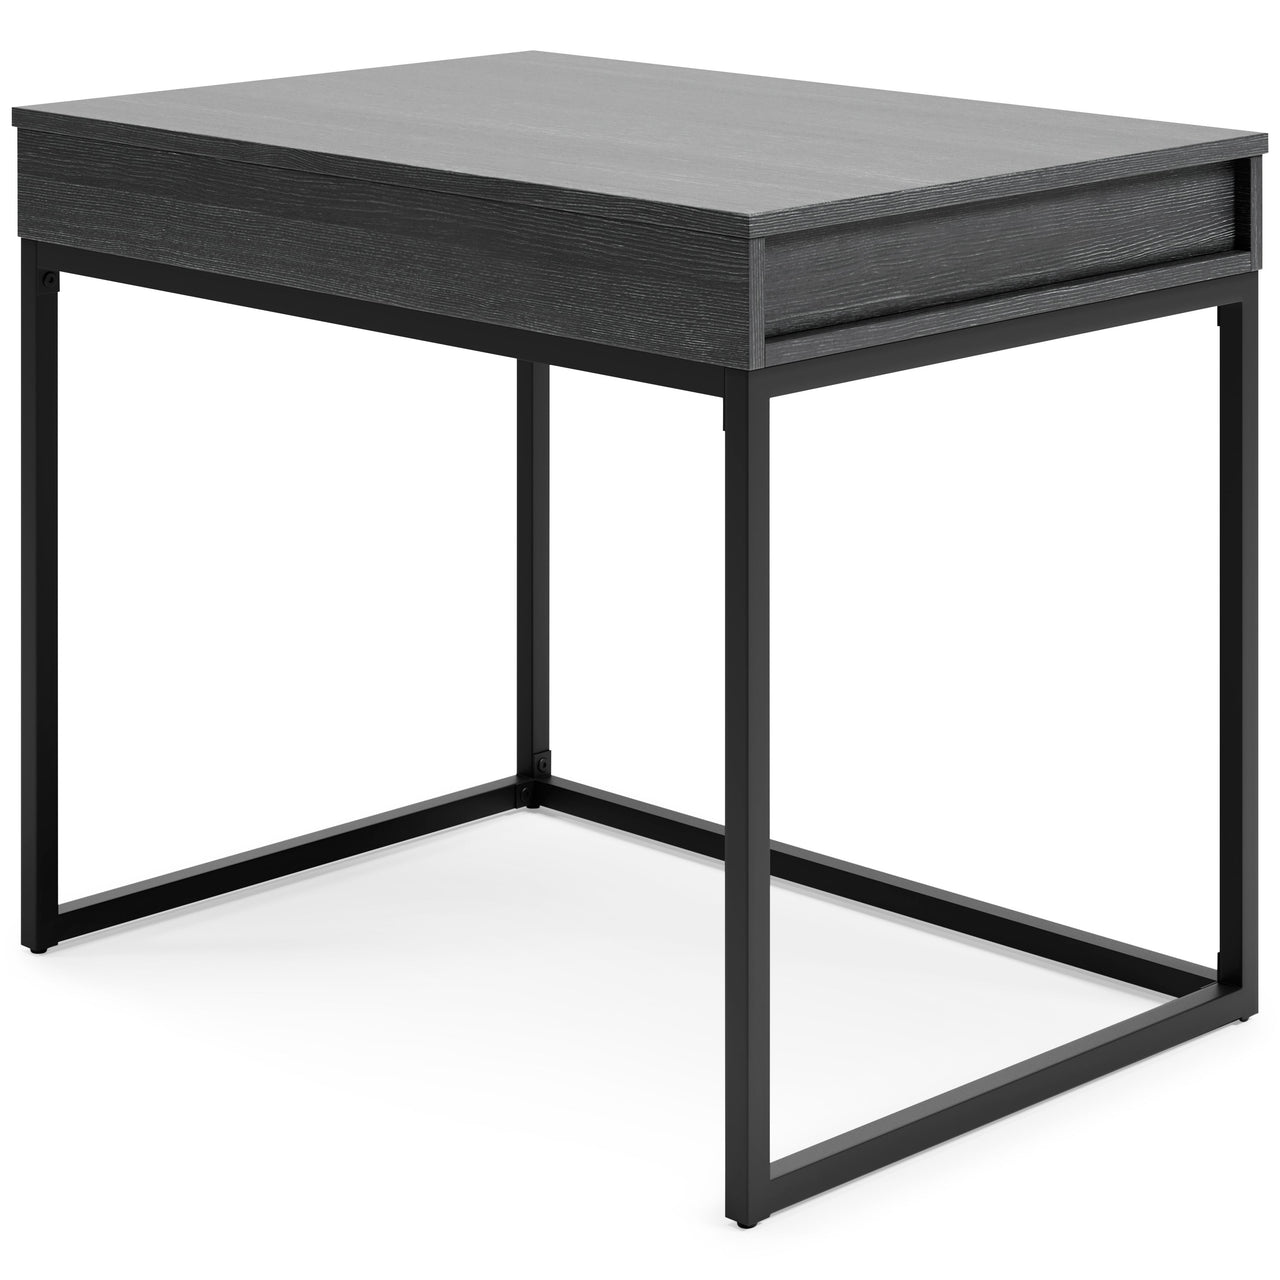 Yarlow - Black - Home Office Lift Top Desk - Tony's Home Furnishings